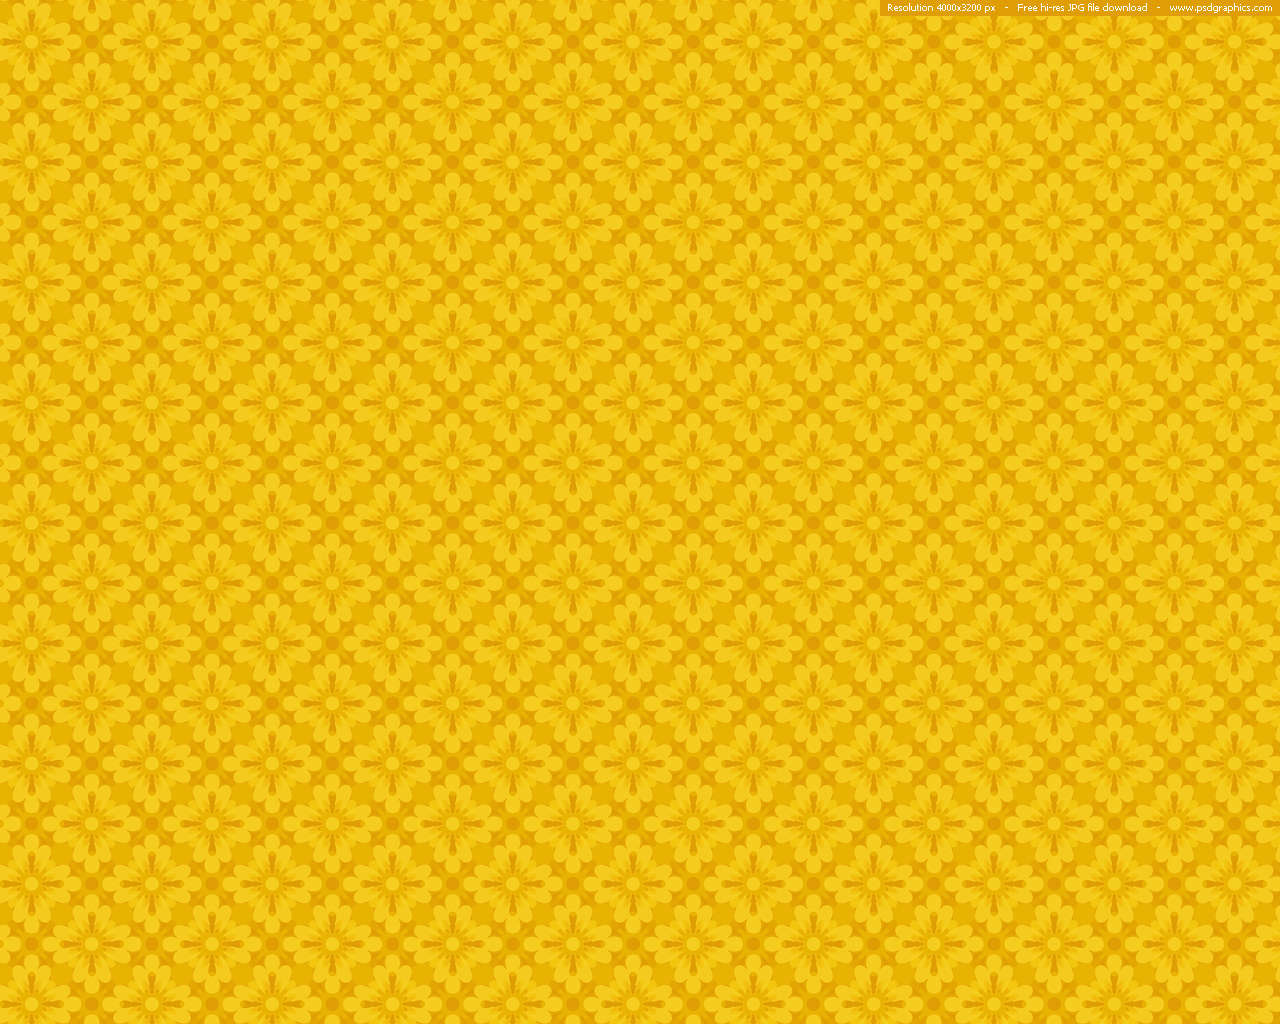 Yellow Backgrounds Image Wallpaper Cave HD Wallpapers Download Free Images Wallpaper [wallpaper981.blogspot.com]